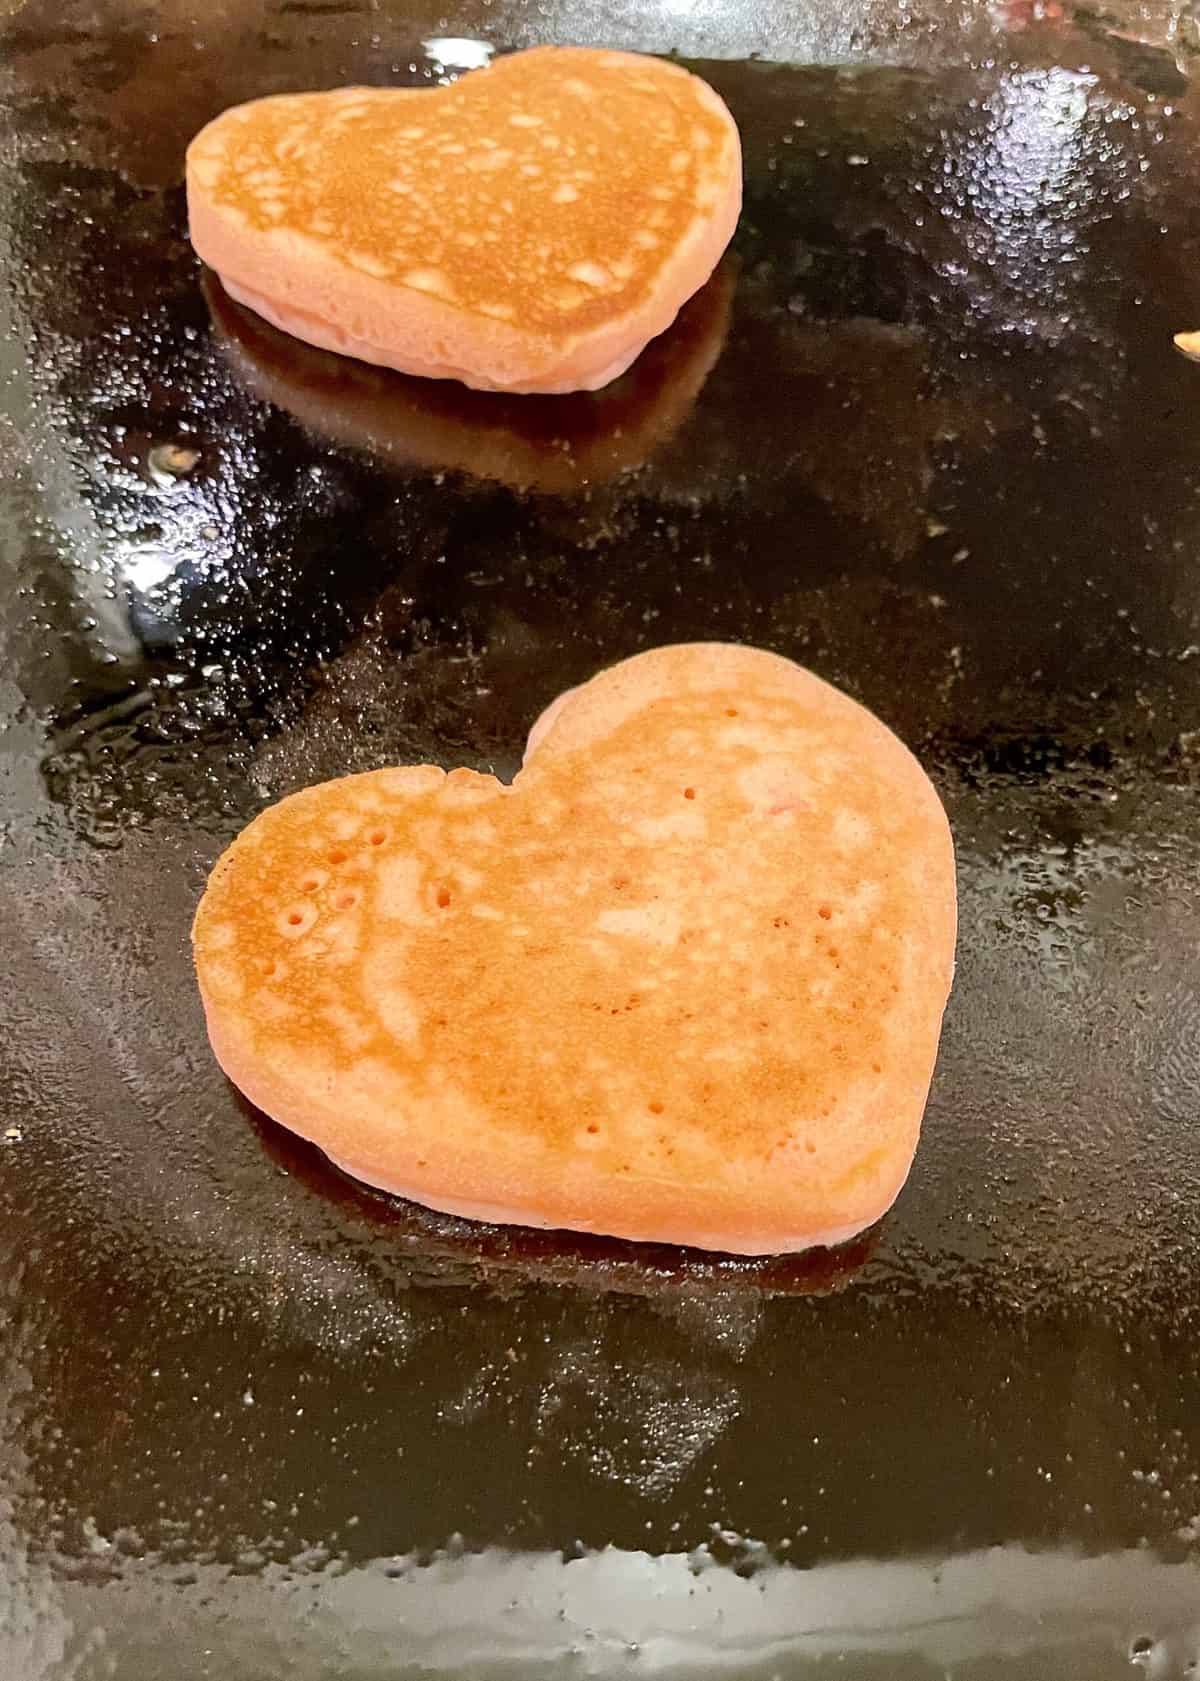 Heart-shaped pancakes for the Valentine's Day Pancake Board